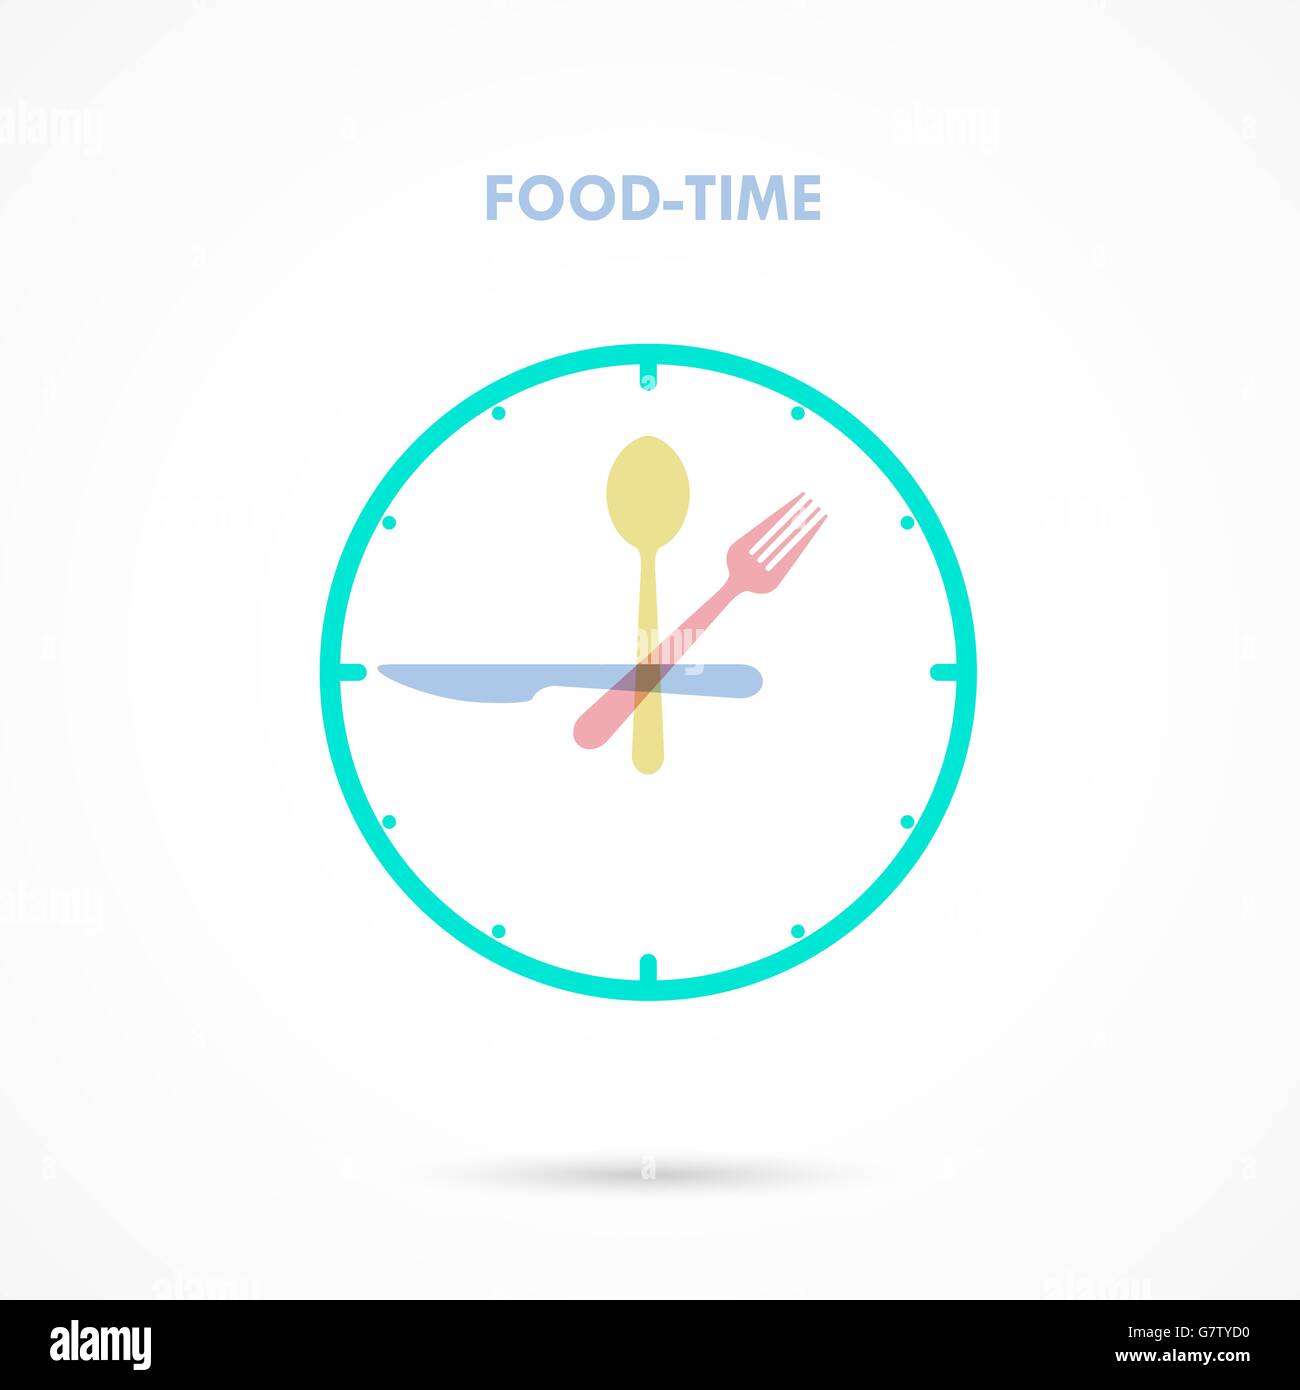 Food Time,Lunch Time icon.Eating time concept.Fork,knife and spoon sign.Business,food and drink concept. Vector illustration. Stock Vector